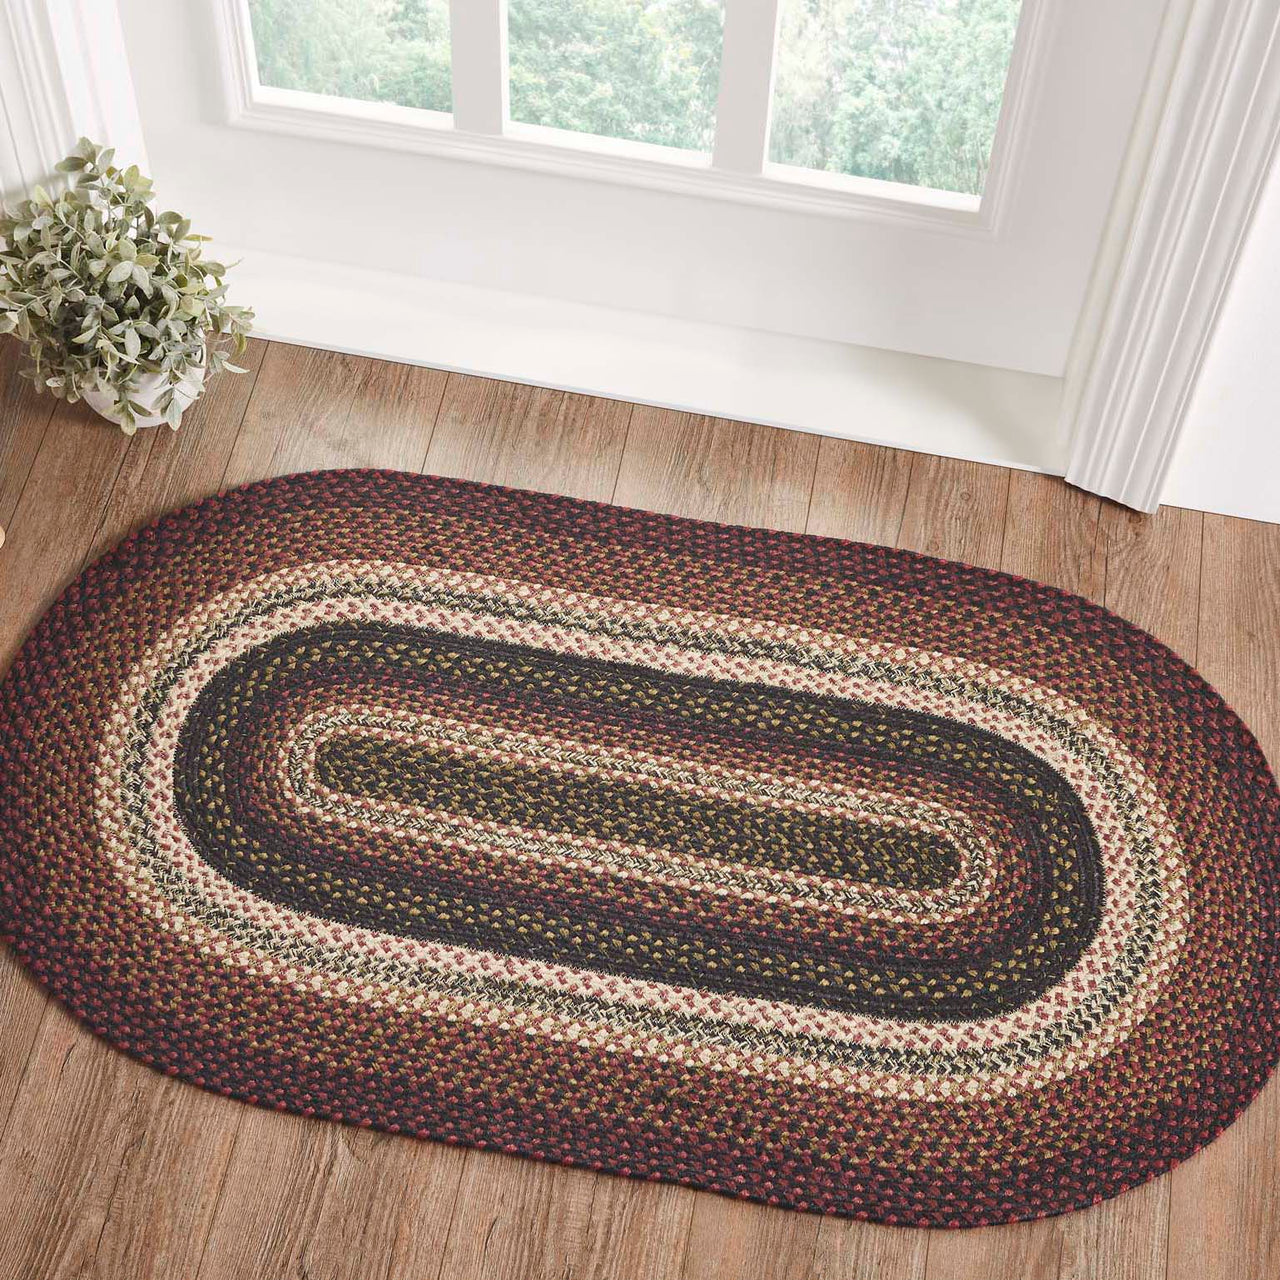 Beckham Jute Braided Rug Oval with Rug Pad 27"x48" VHC Brands